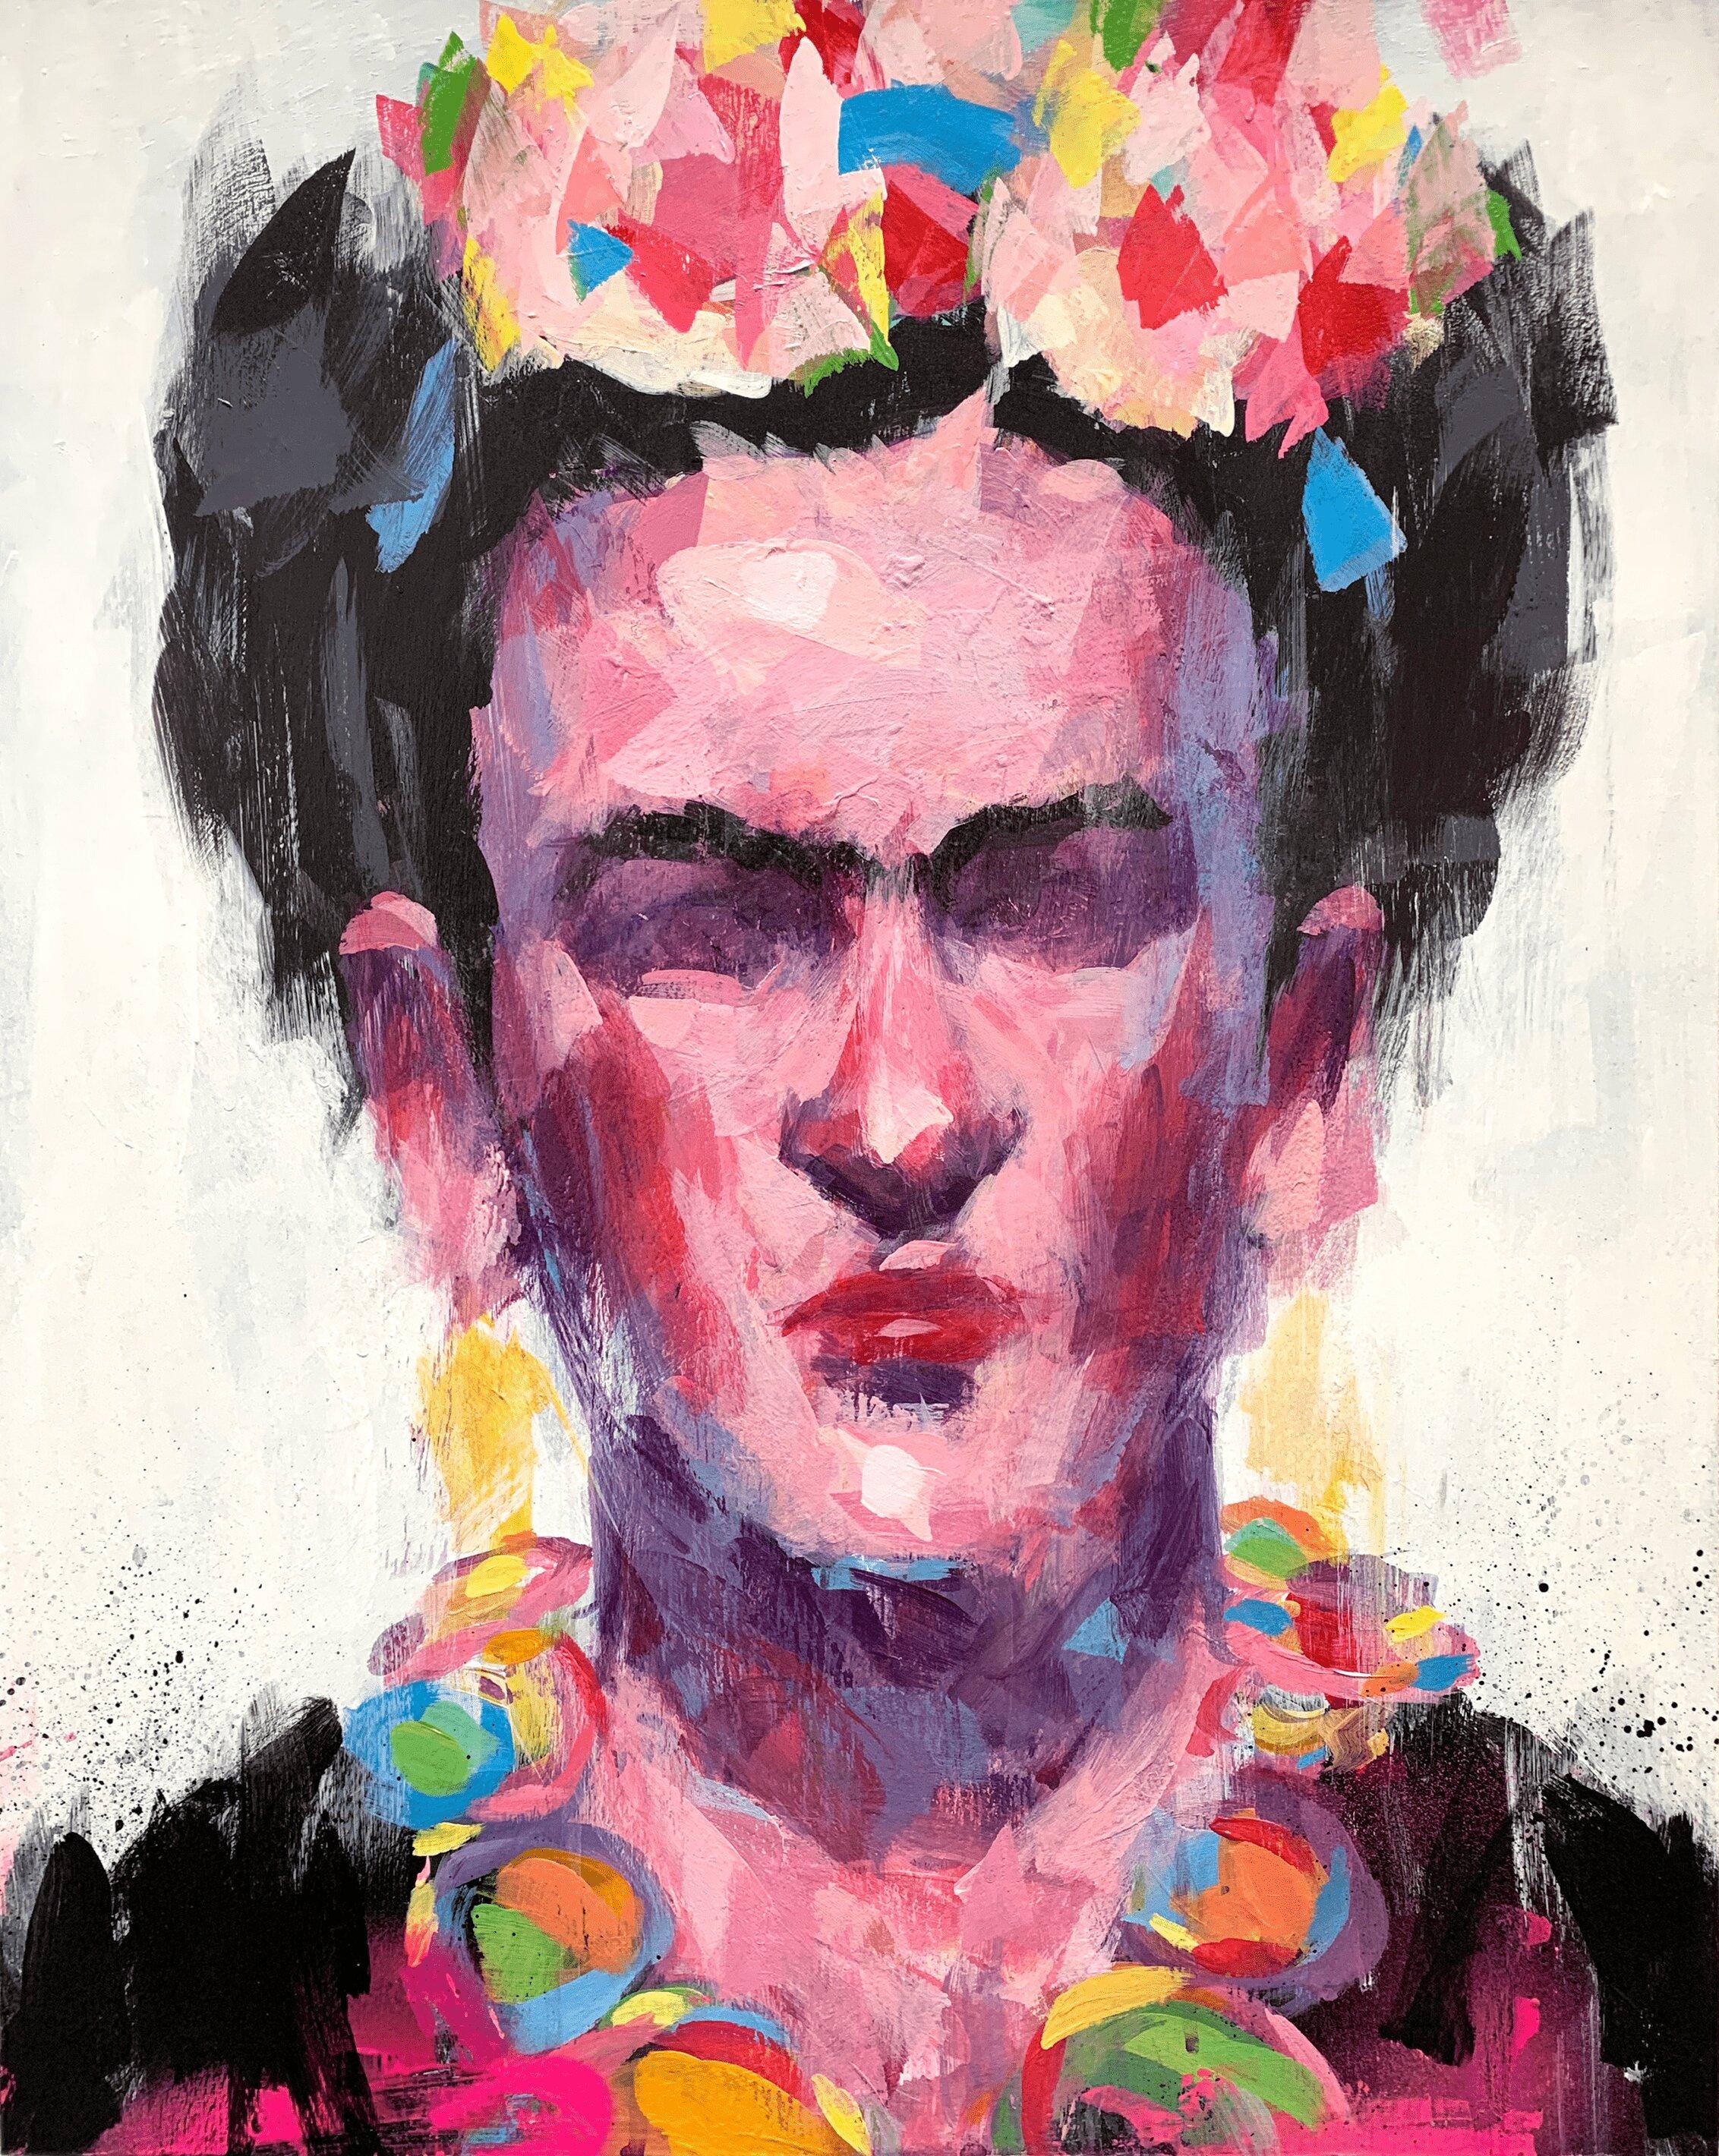 'Fierce No.02' is an impressionist portrait painting of Frida Kahlo by urban impressionist painter Steve Javiel. The piece incorporates a blend of acrylic paints, oil pastels, and spray paints on a wood panel. It measures 20 x 16 x 1.5 inches and is